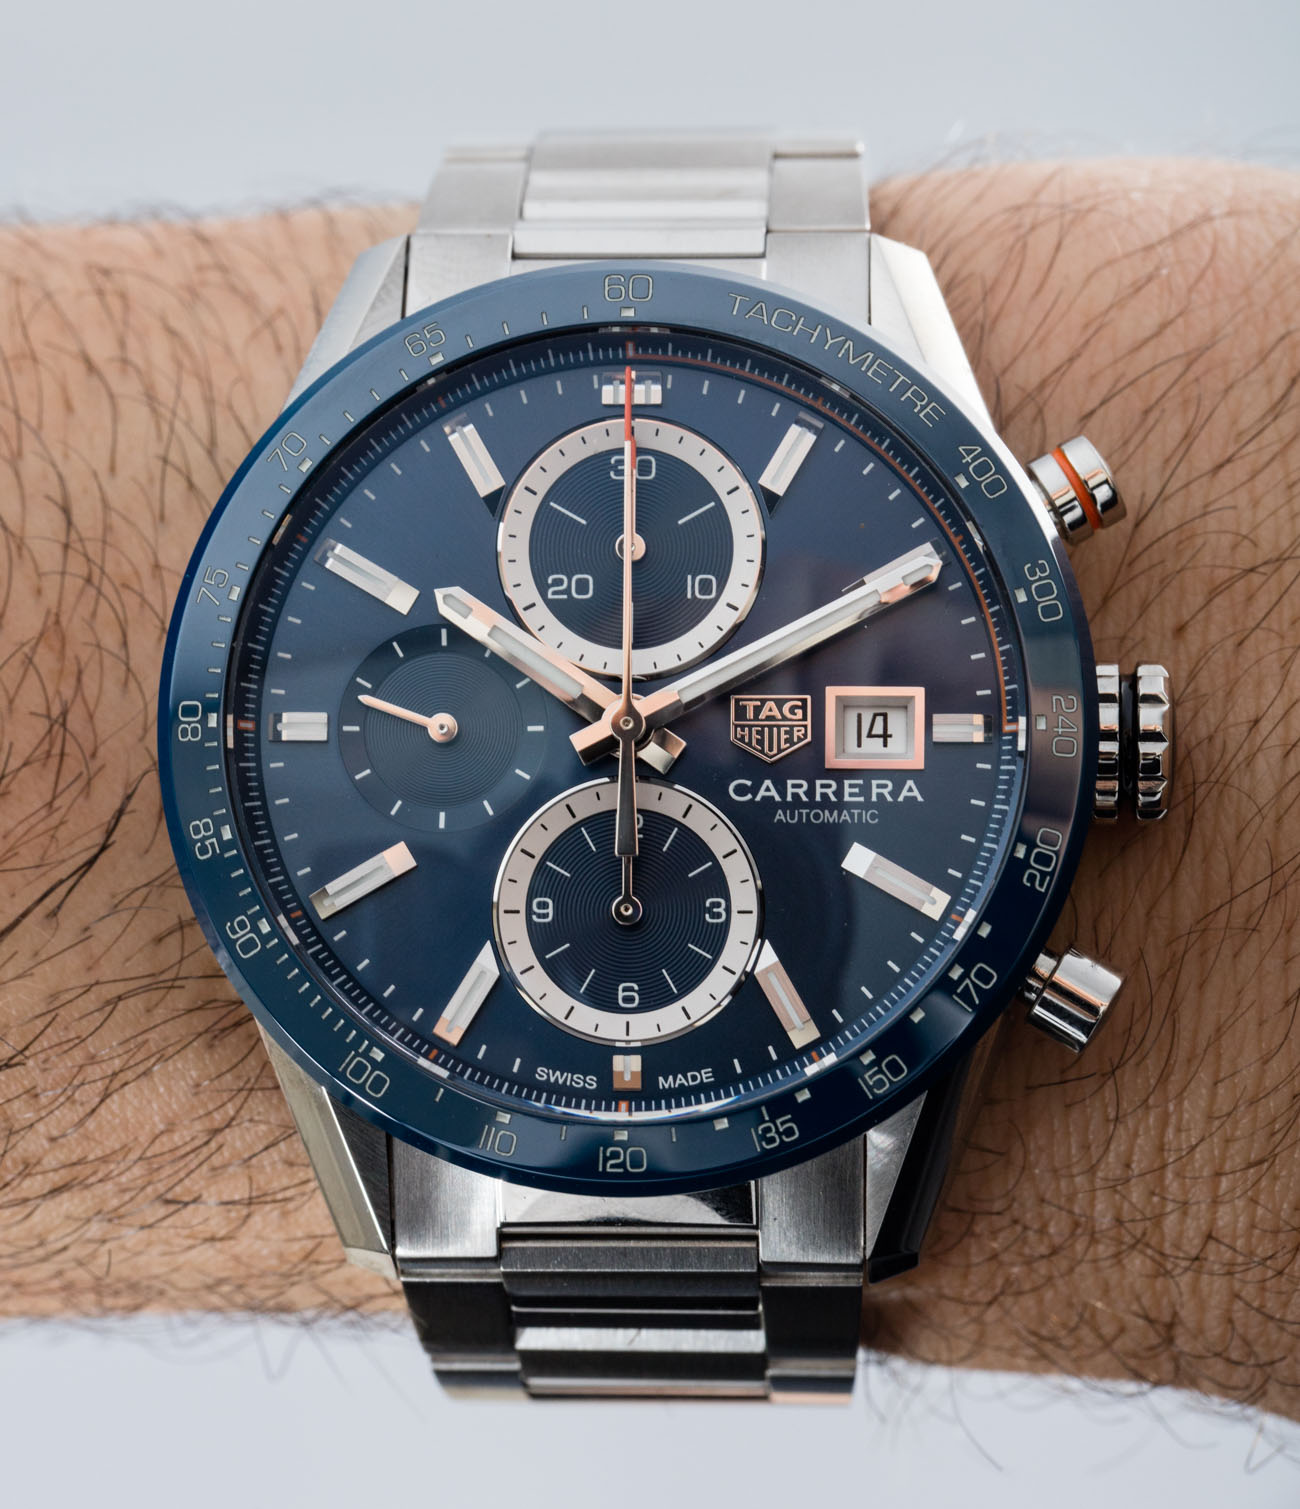 TAG Heuer CARRERA Calibre 16 Automatic Chronograph Watch